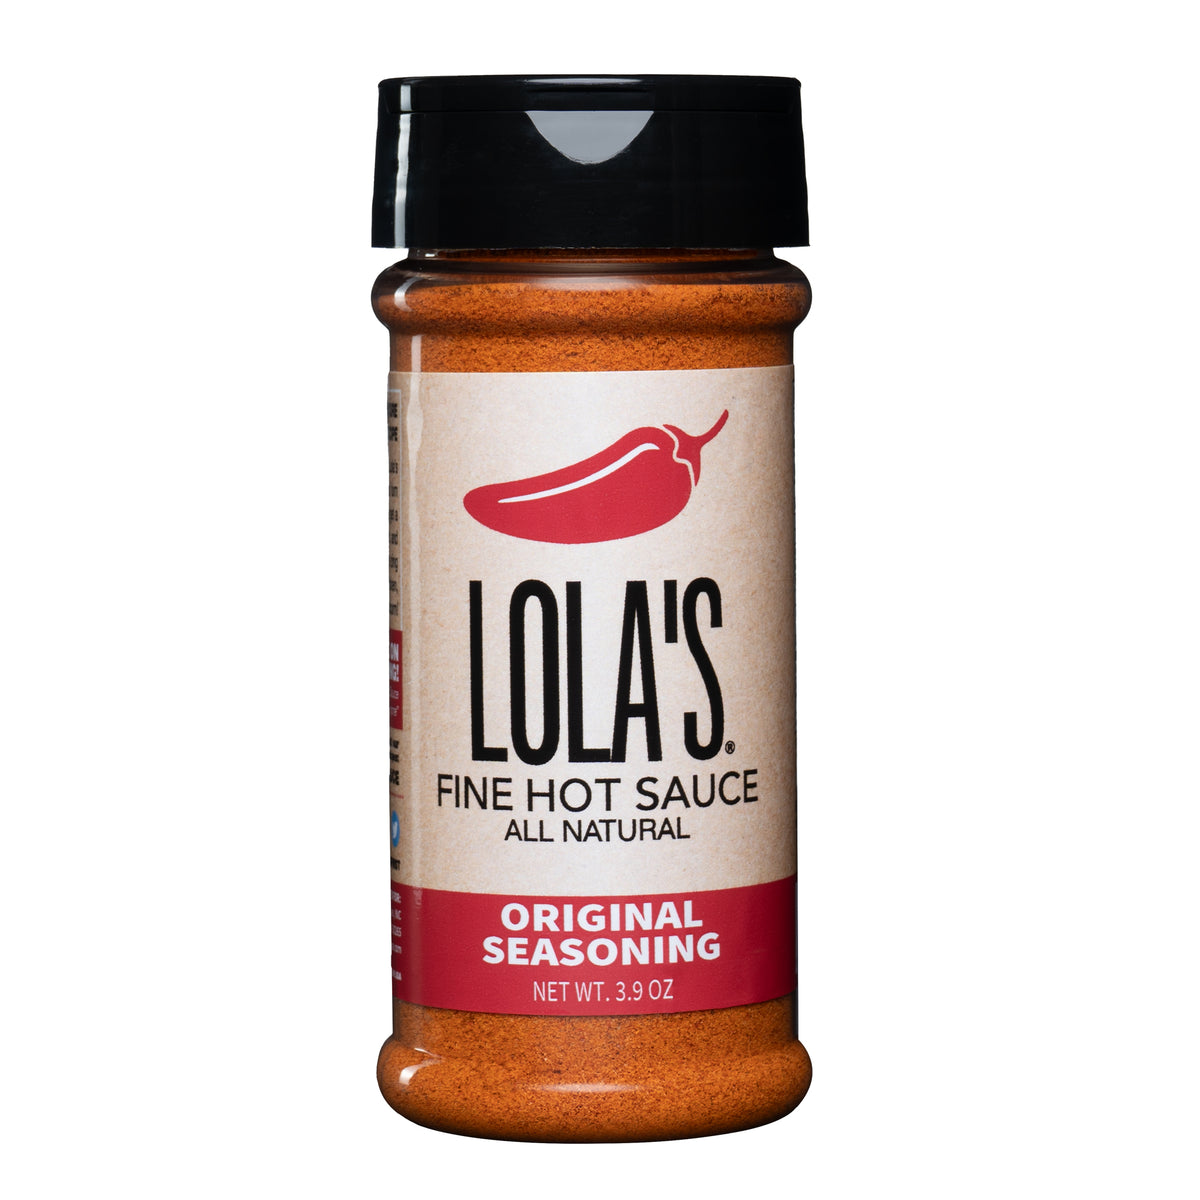 Lola's "Game Day" Bundle: a bottle of hot sauce, a label close-up, and a red hot dog with white stripe.